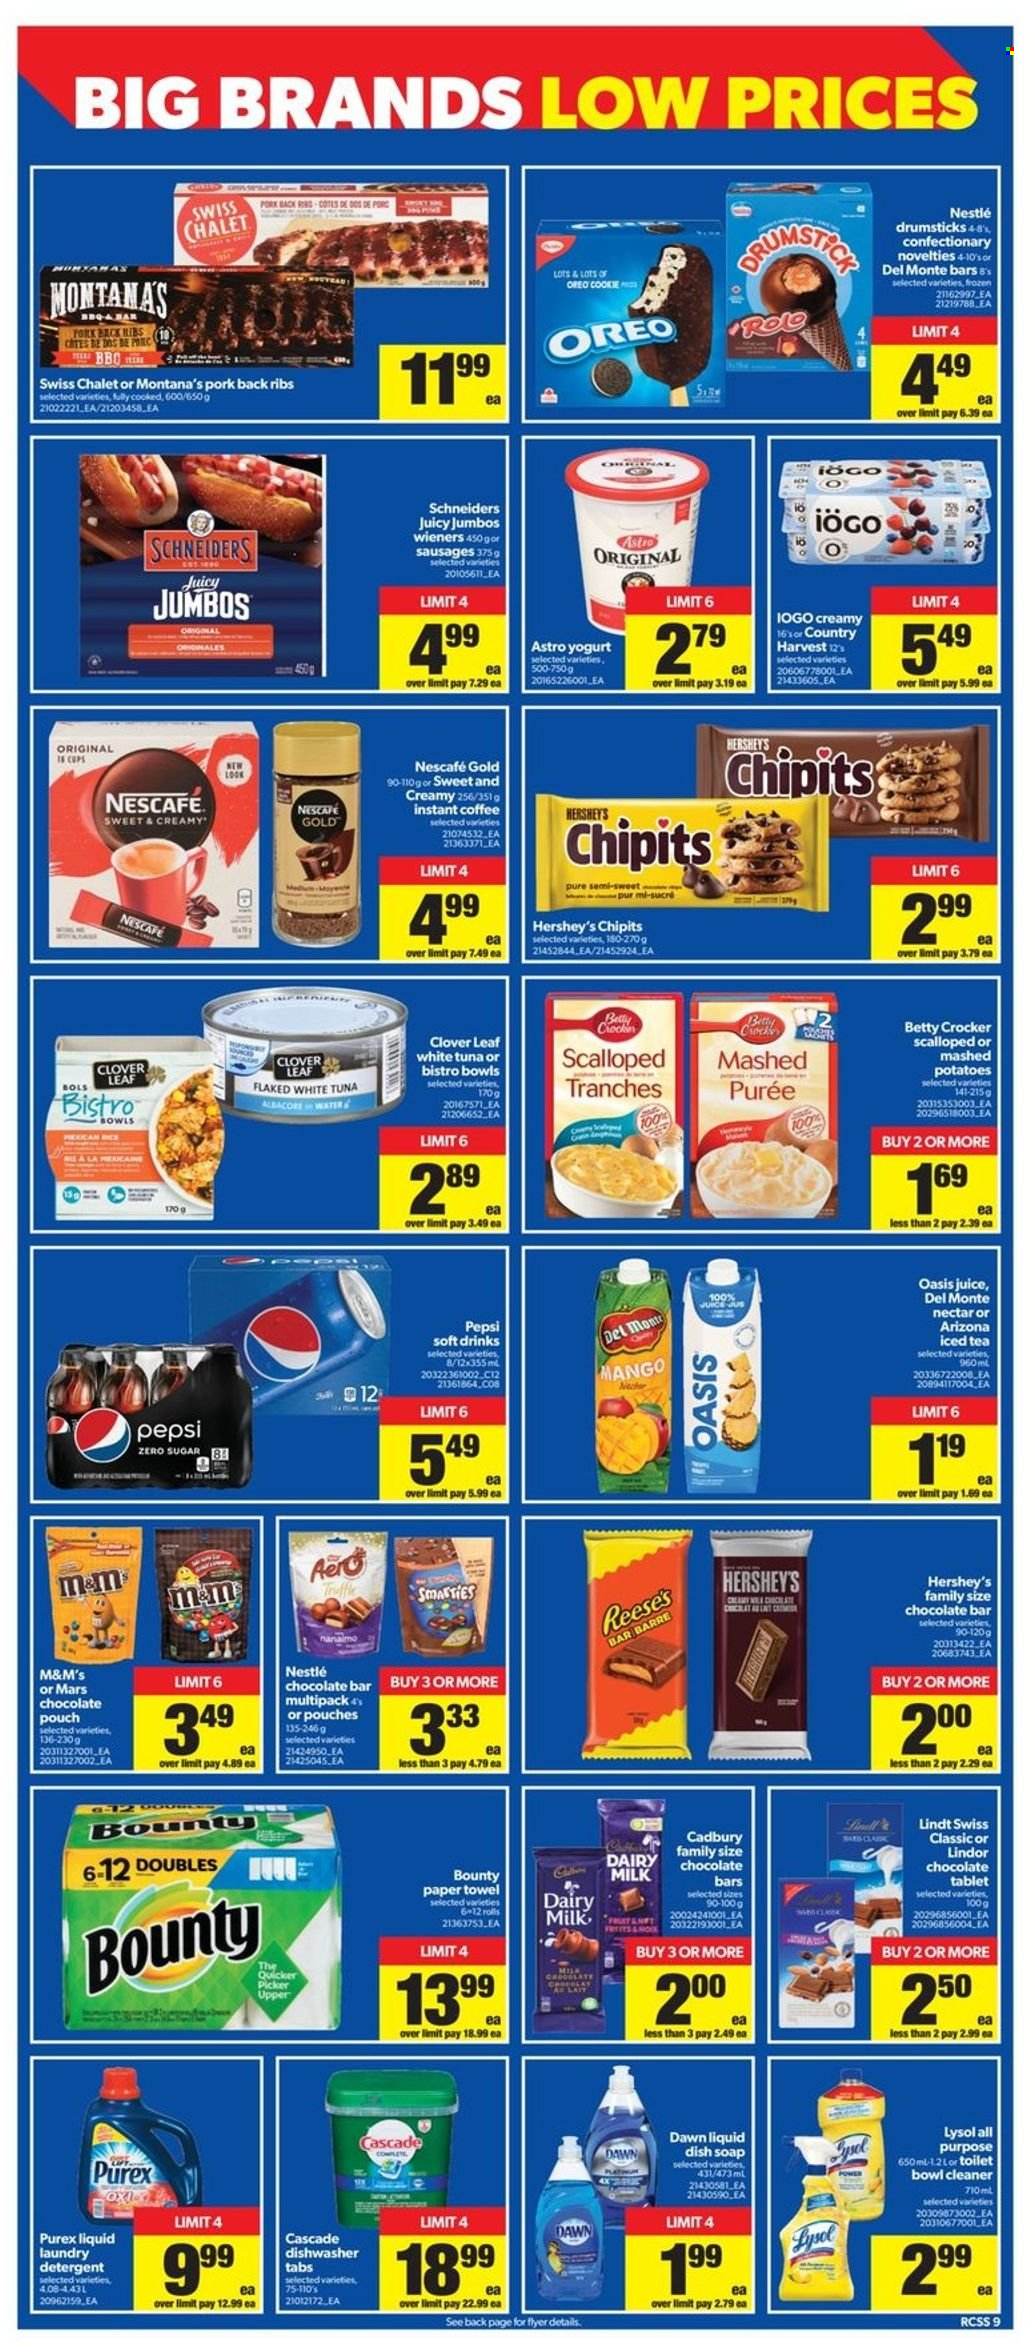 thumbnail - Real Canadian Superstore Flyer - May 12, 2022 - May 18, 2022 - Sales products - tablet, potatoes, mango, tuna, sausage, yoghurt, Clover, Reese's, Hershey's, Country Harvest, Bounty, Mars, Cadbury, Dairy Milk, chocolate bar, Pepsi, juice, ice tea, soft drink, AriZona, instant coffee, pork meat, pork ribs, pork back ribs, paper towels, cleaner, Lysol, Cascade, Purex, soap, detergent, Nestlé, Oreo, Lindt, Lindor, Smarties, Nescafé, M&M's. Page 10.